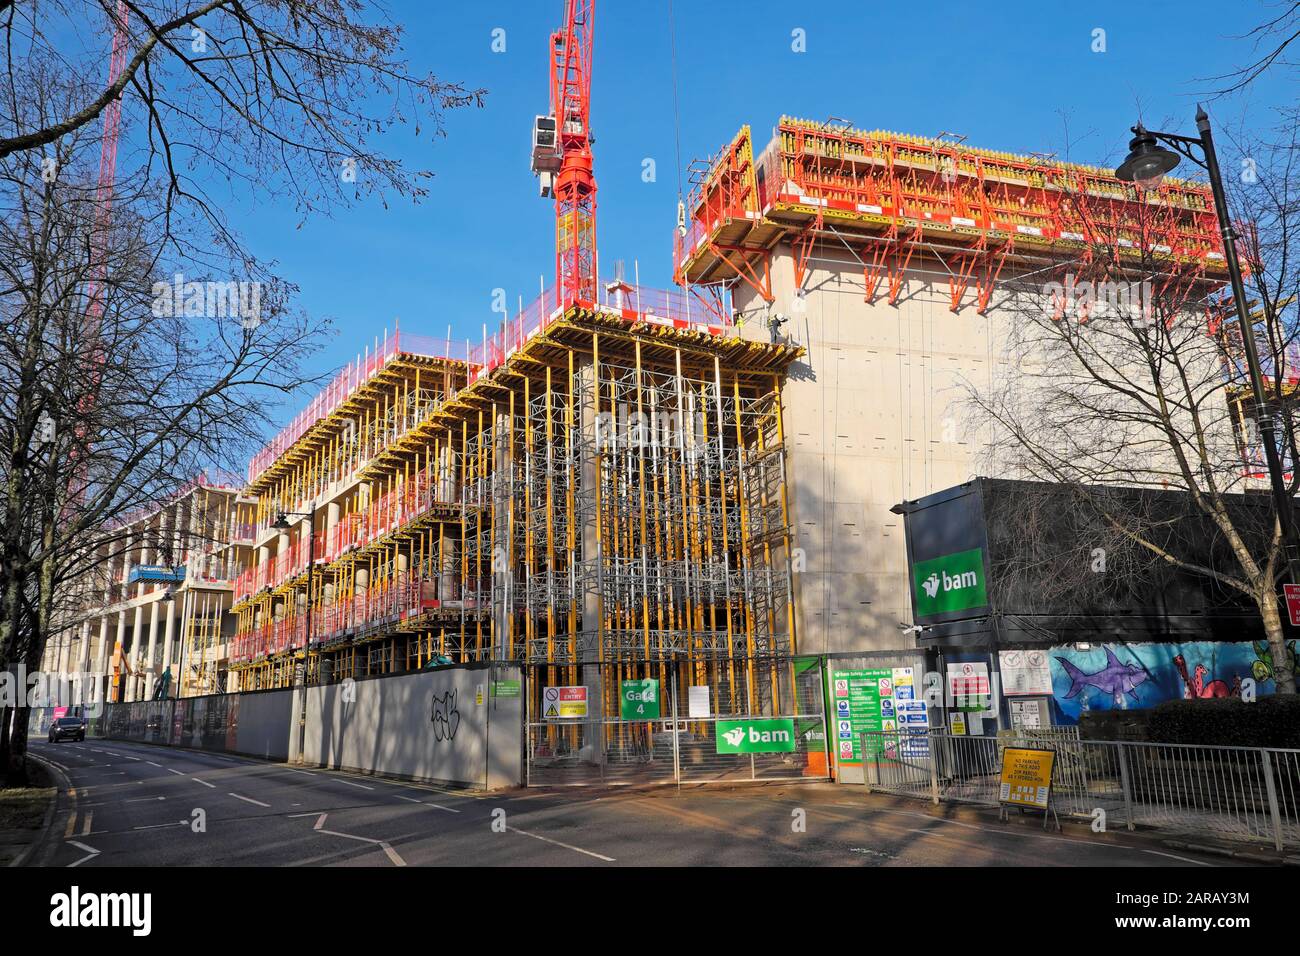 Cardiff University Centre for Student Life under construction exterior view in Cardiff city Wales UK  KATHY DEWITT Stock Photo